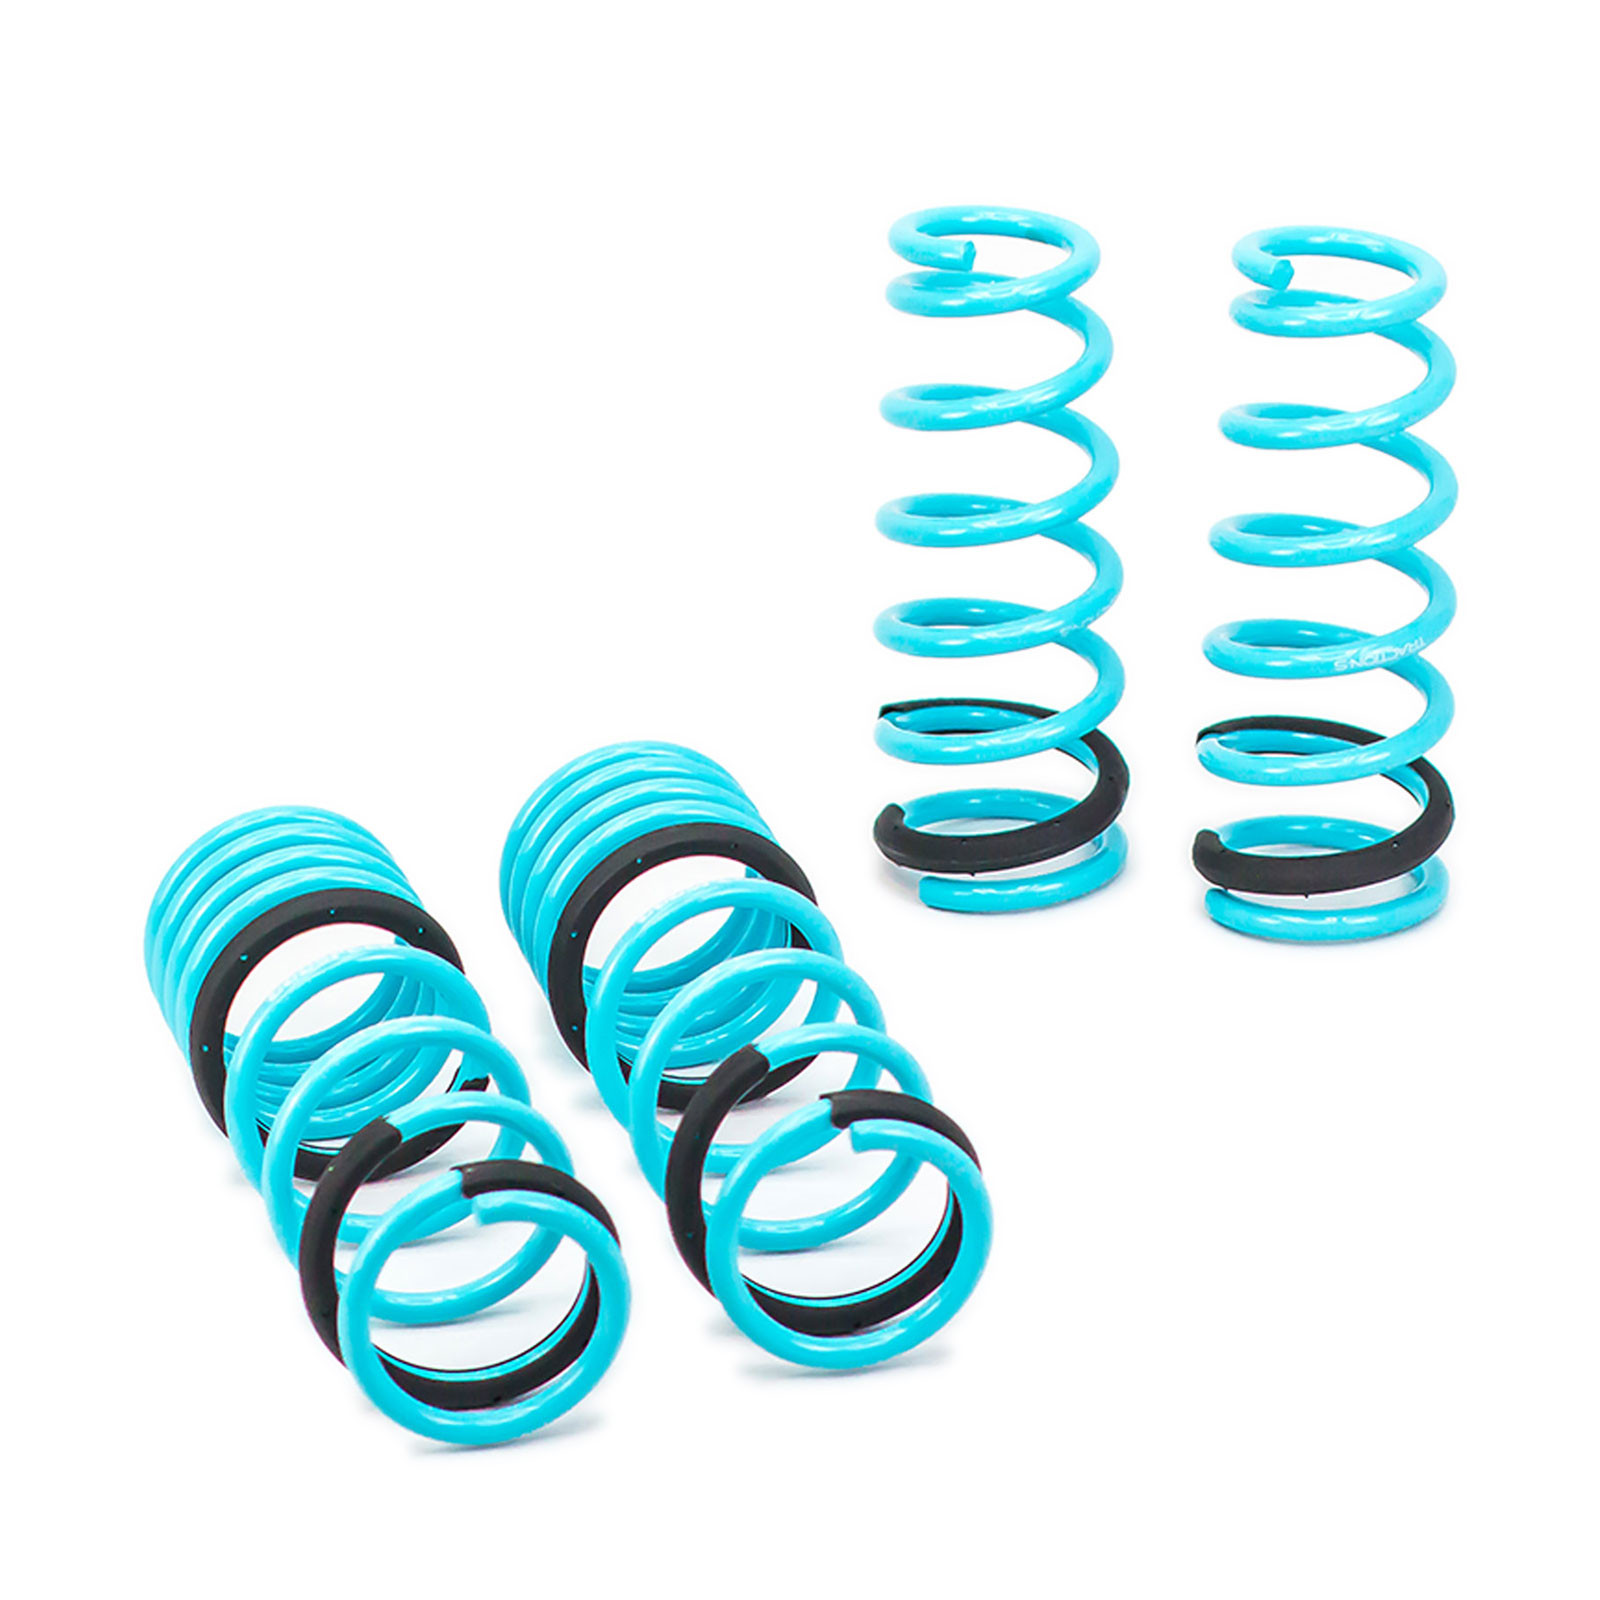 Godspeed Traction-S Lowering Spring Set For Scion xB/xA 2004-07 LS-TS-SN-0004 